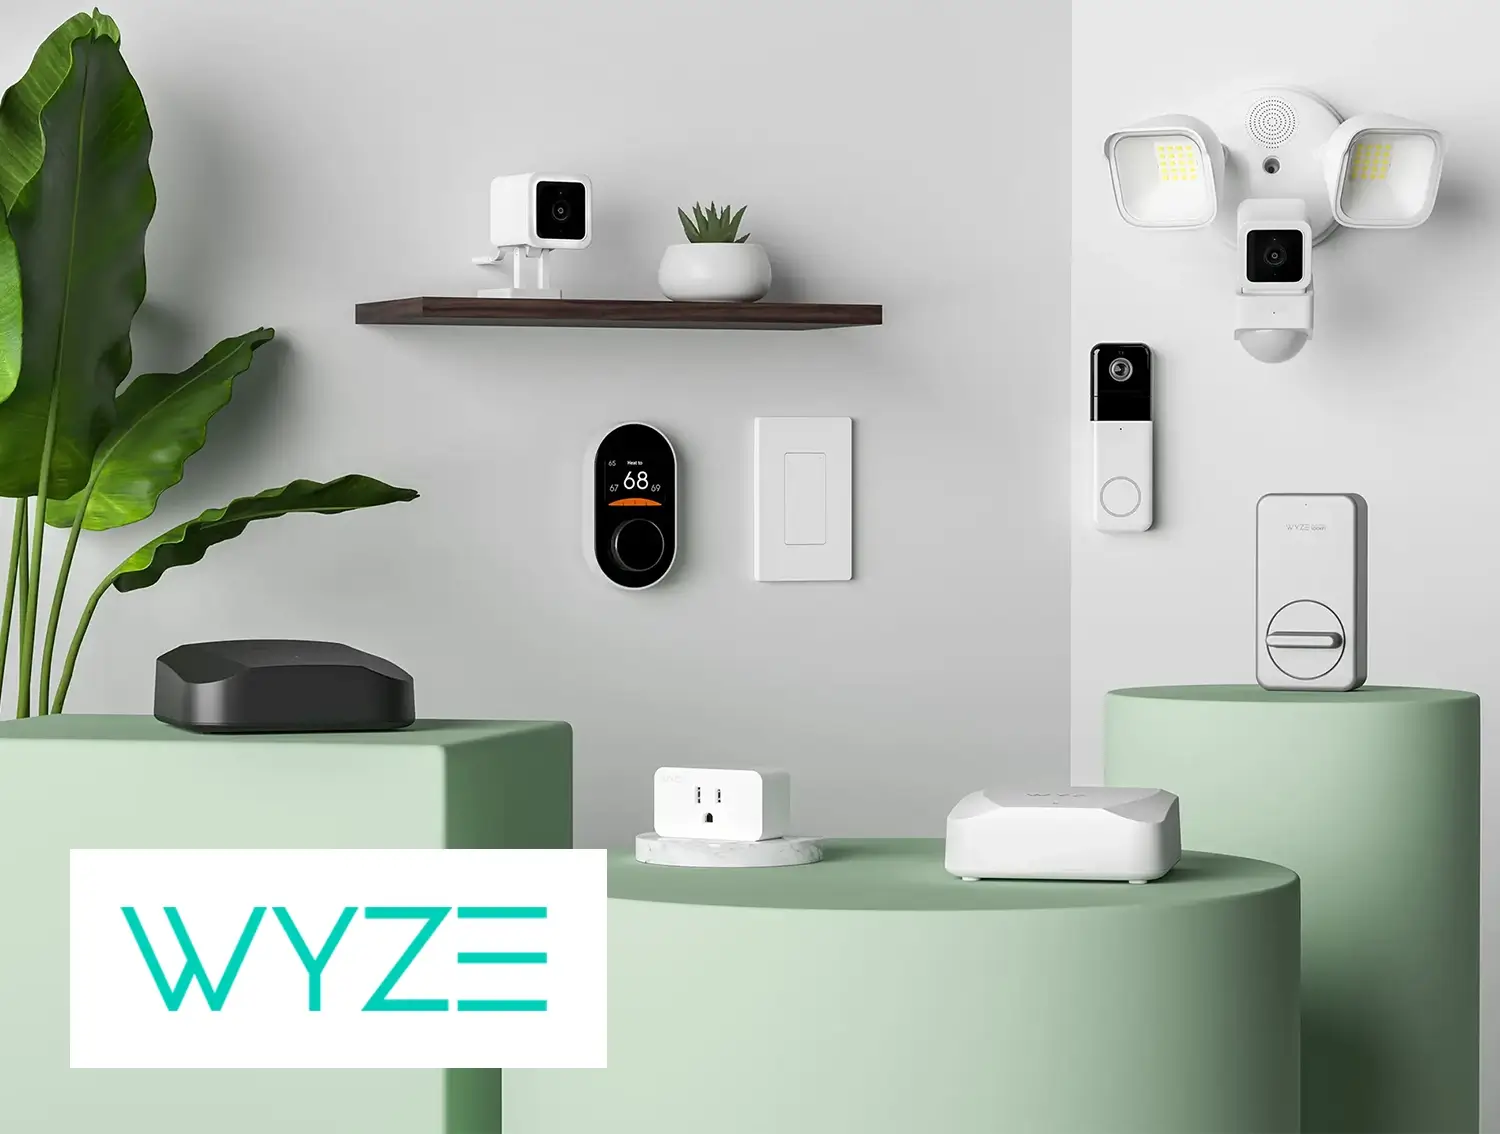 Wyze’s Sales Skyrocket with Our CGI Solutions: A Case Study